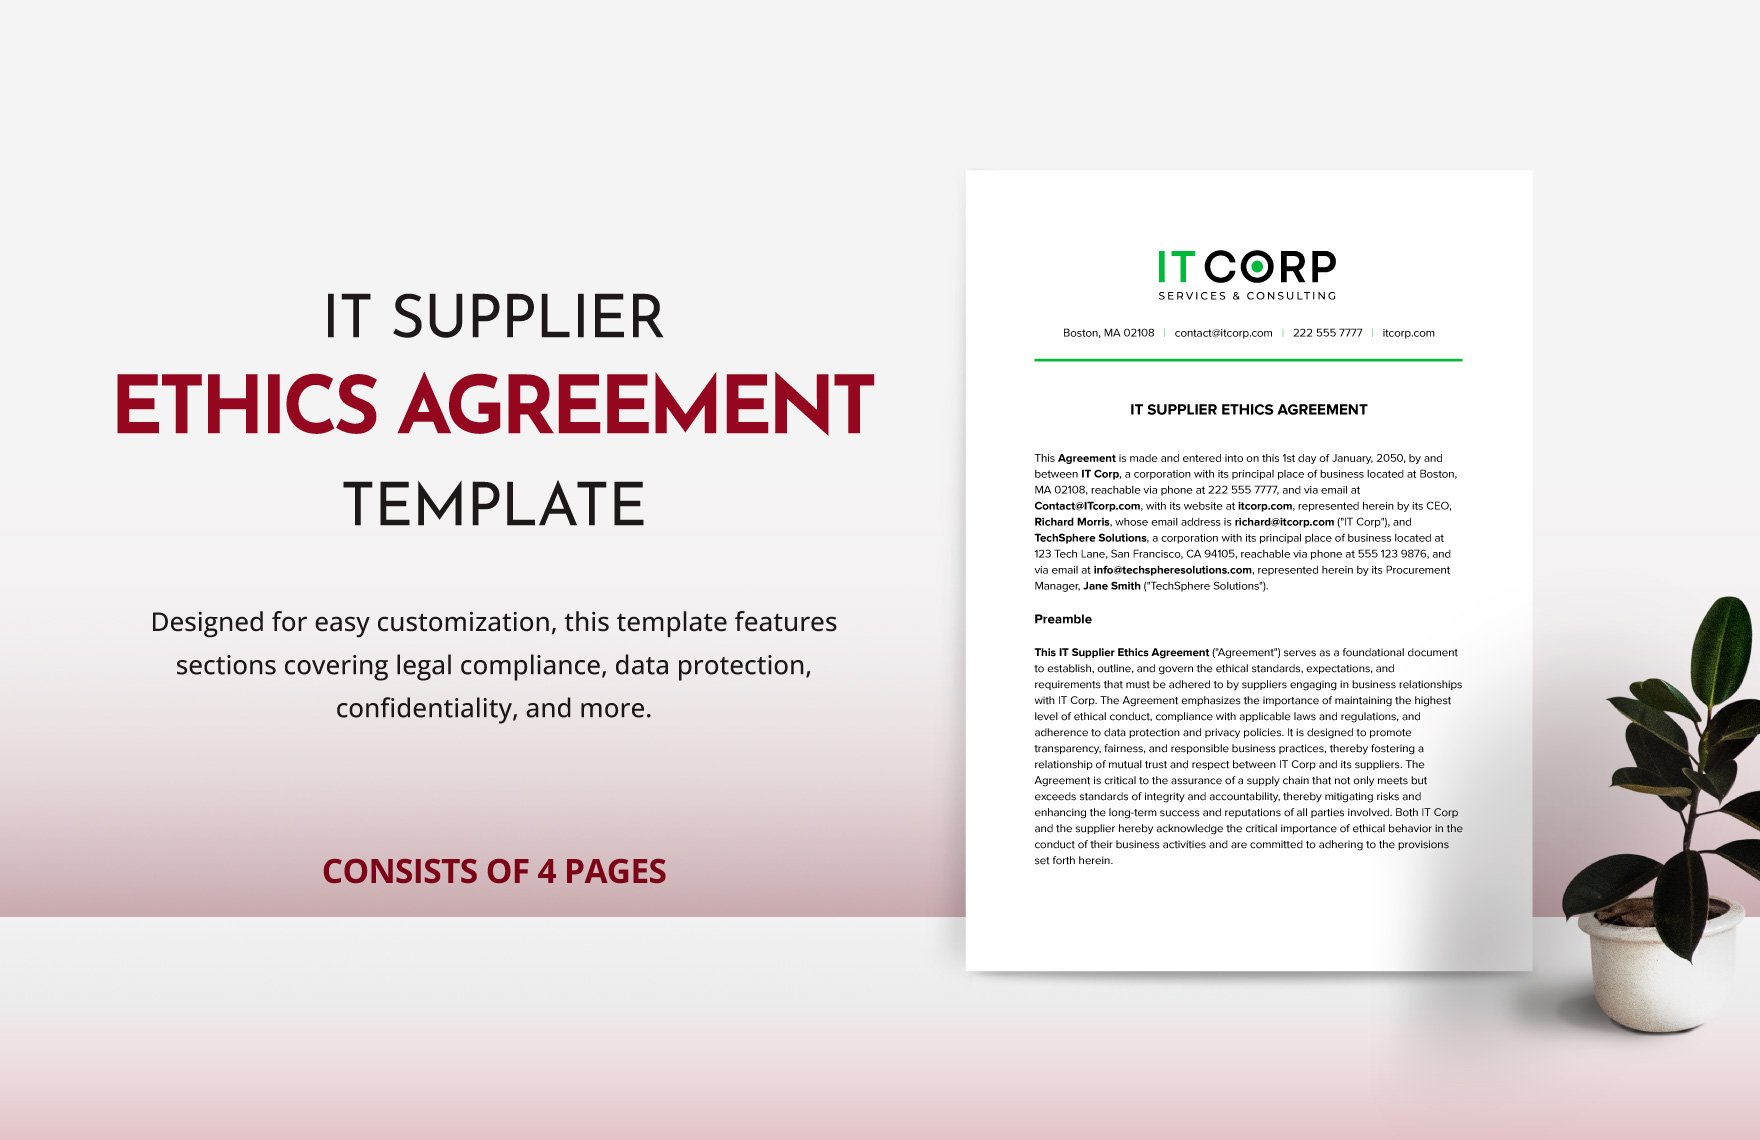 IT Supplier Ethics Agreement Template